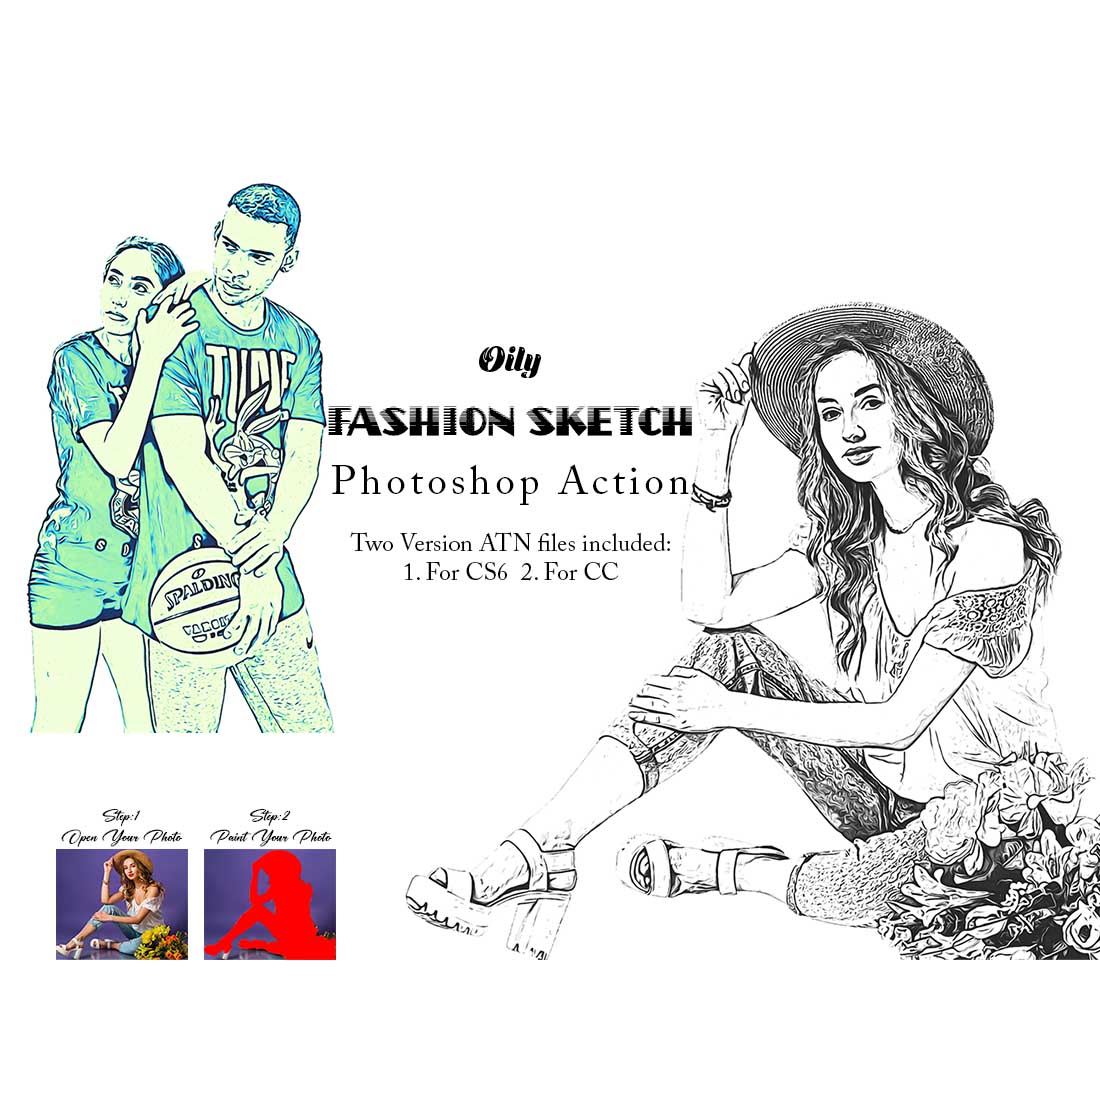 Oily Fashion Sketch Photoshop Action cover image.